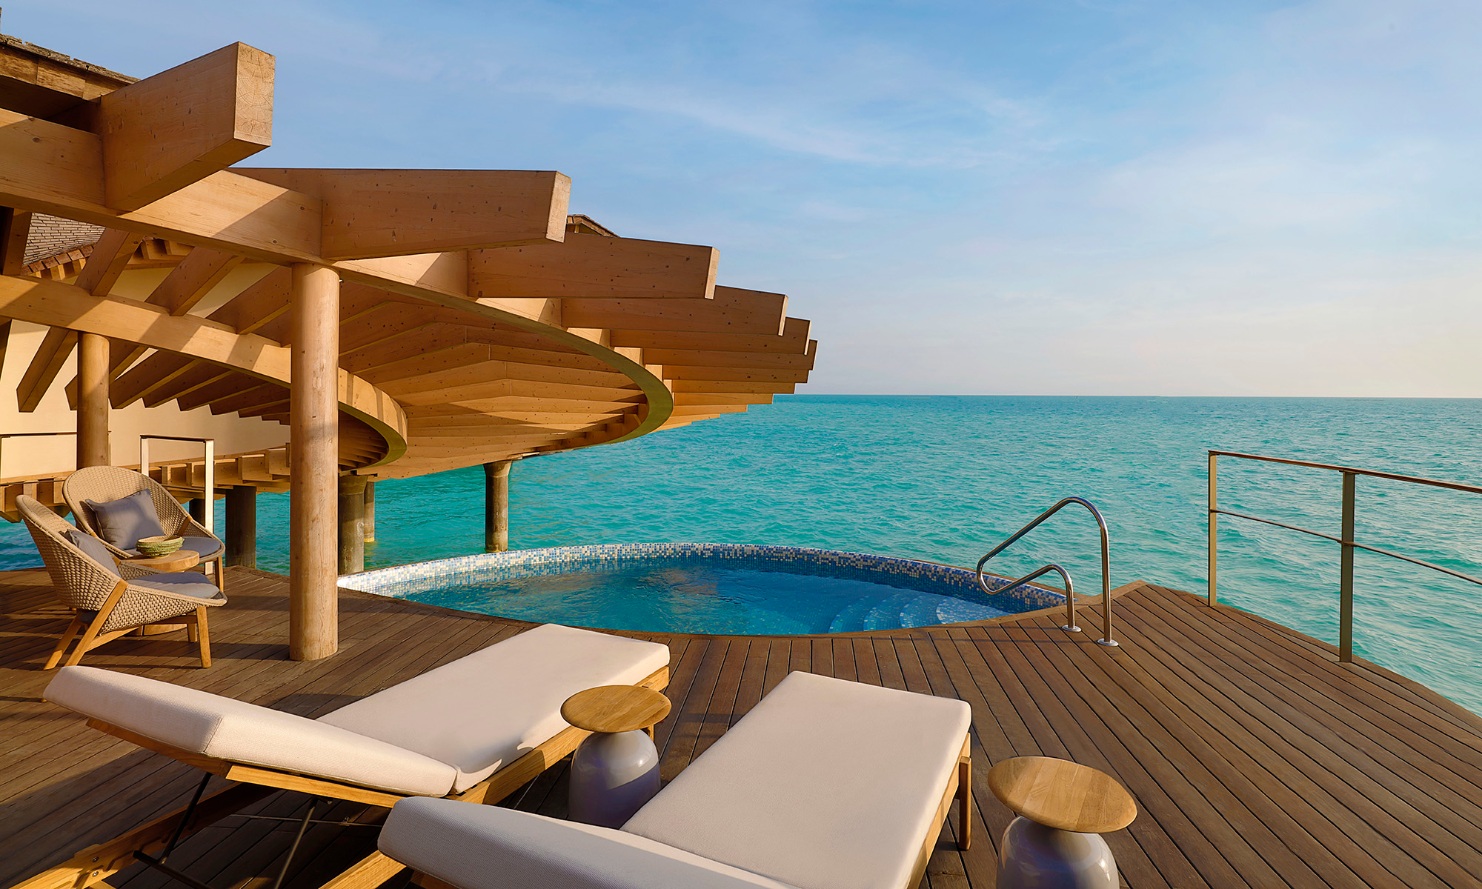 View of the sun terrace of one of the water villas overlooking the Red Sea